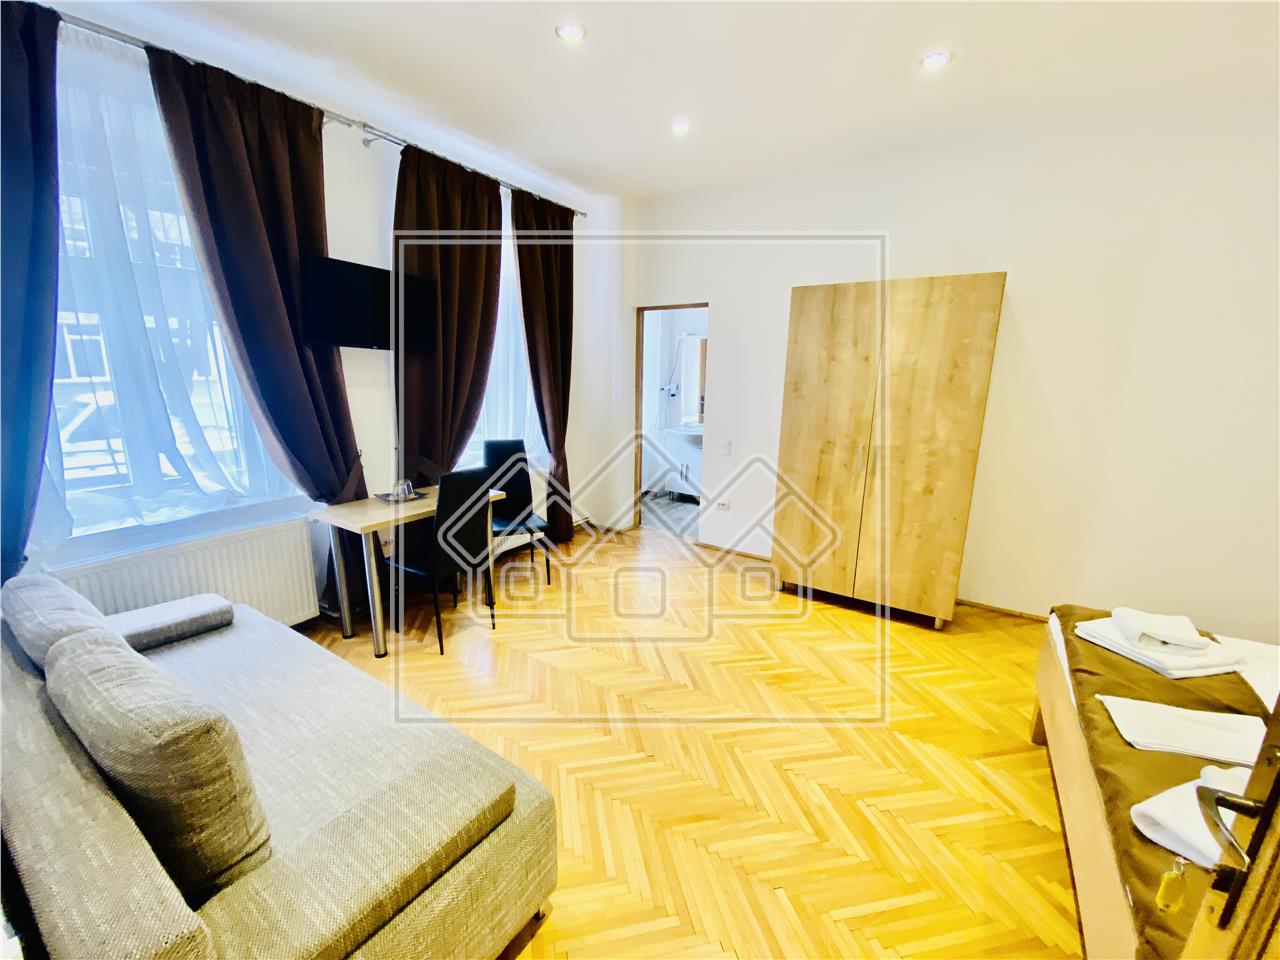 Apartment for sale in Sibiu - 187 sqm - 4 rooms, 4 bathrooms and cella